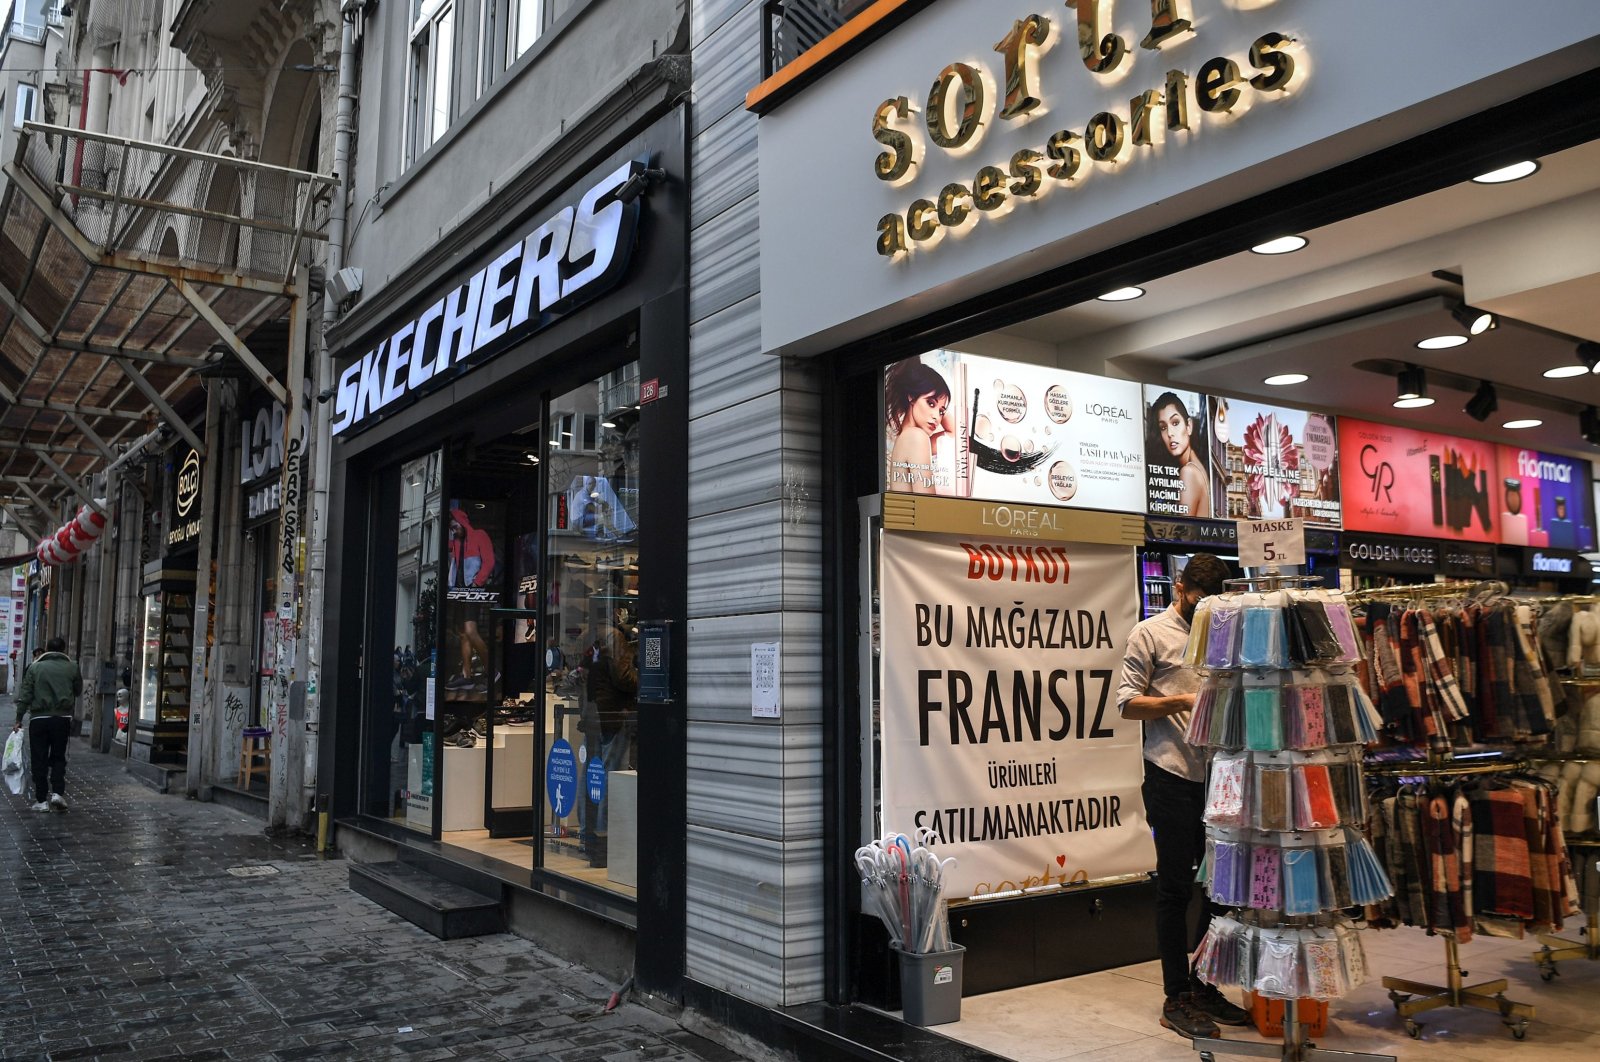 A banner reading "Boycott, We do not sell French products in this shop" at the entrance of a store in Istanbul, Oct. 30, 2020. (AFP Photo)